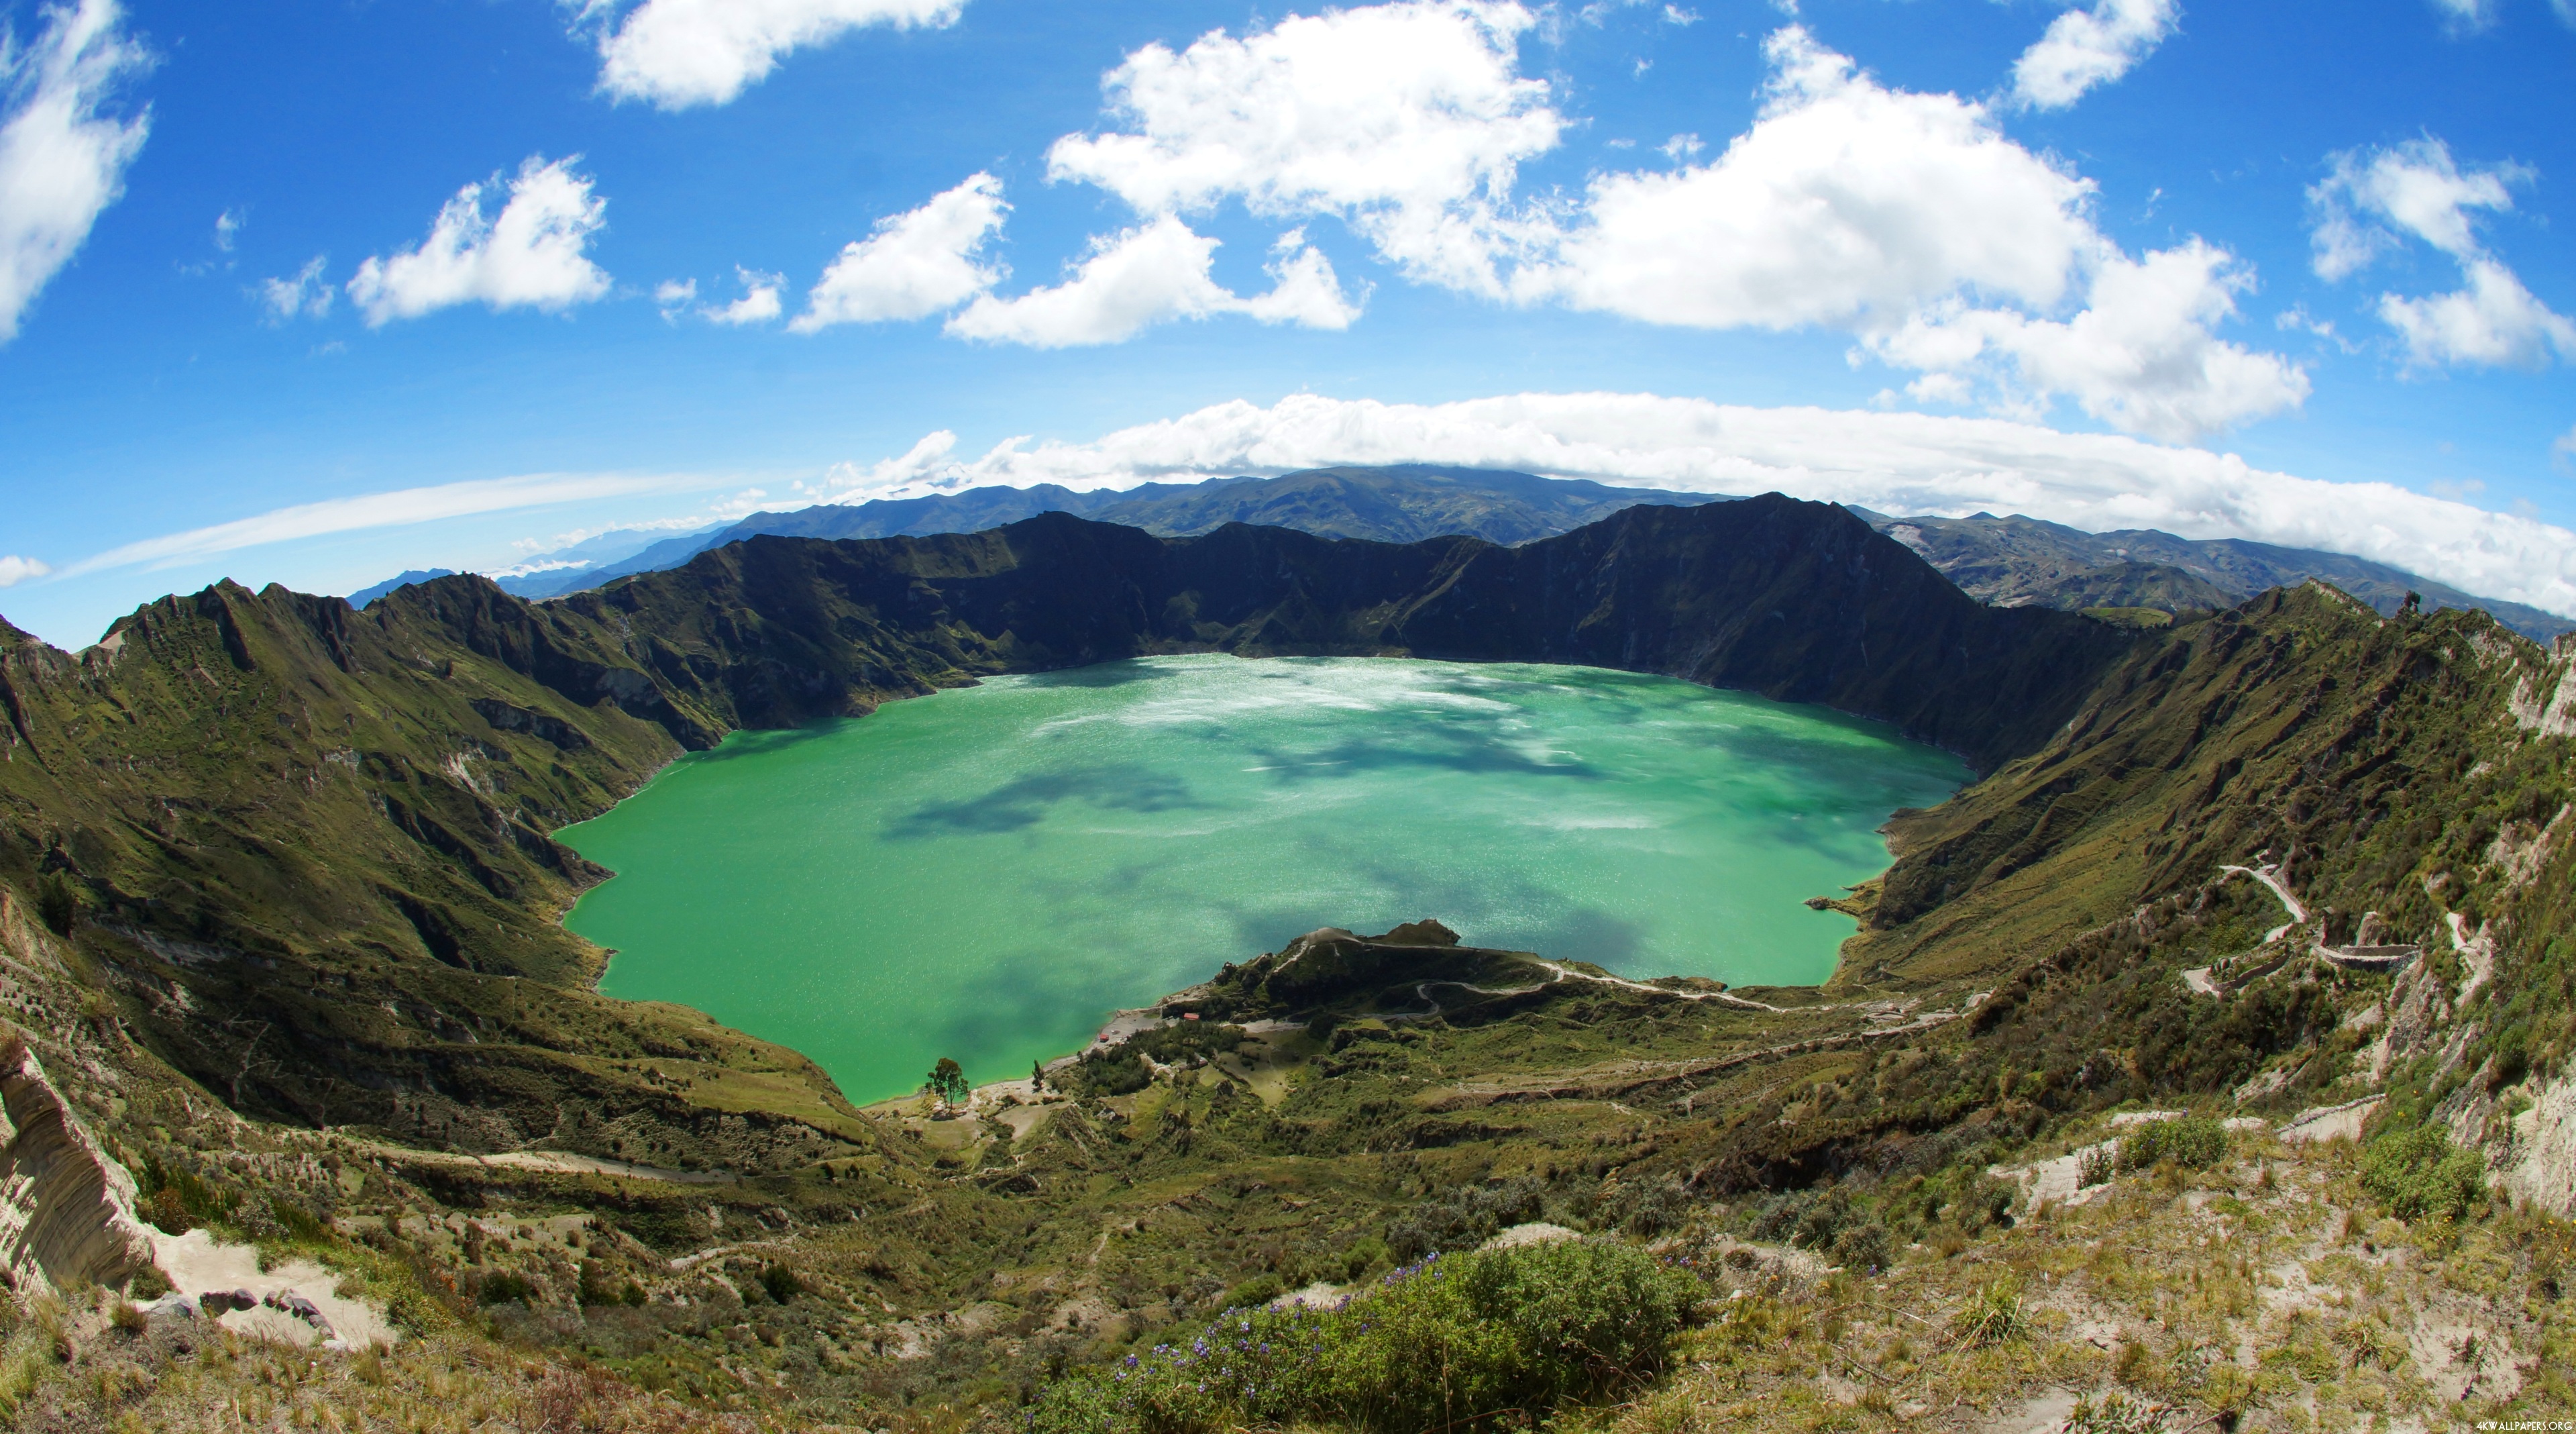 🔥 Download 4k Volcano Lake Wallpaper Id by @jbrown50 | Quilotoa ...